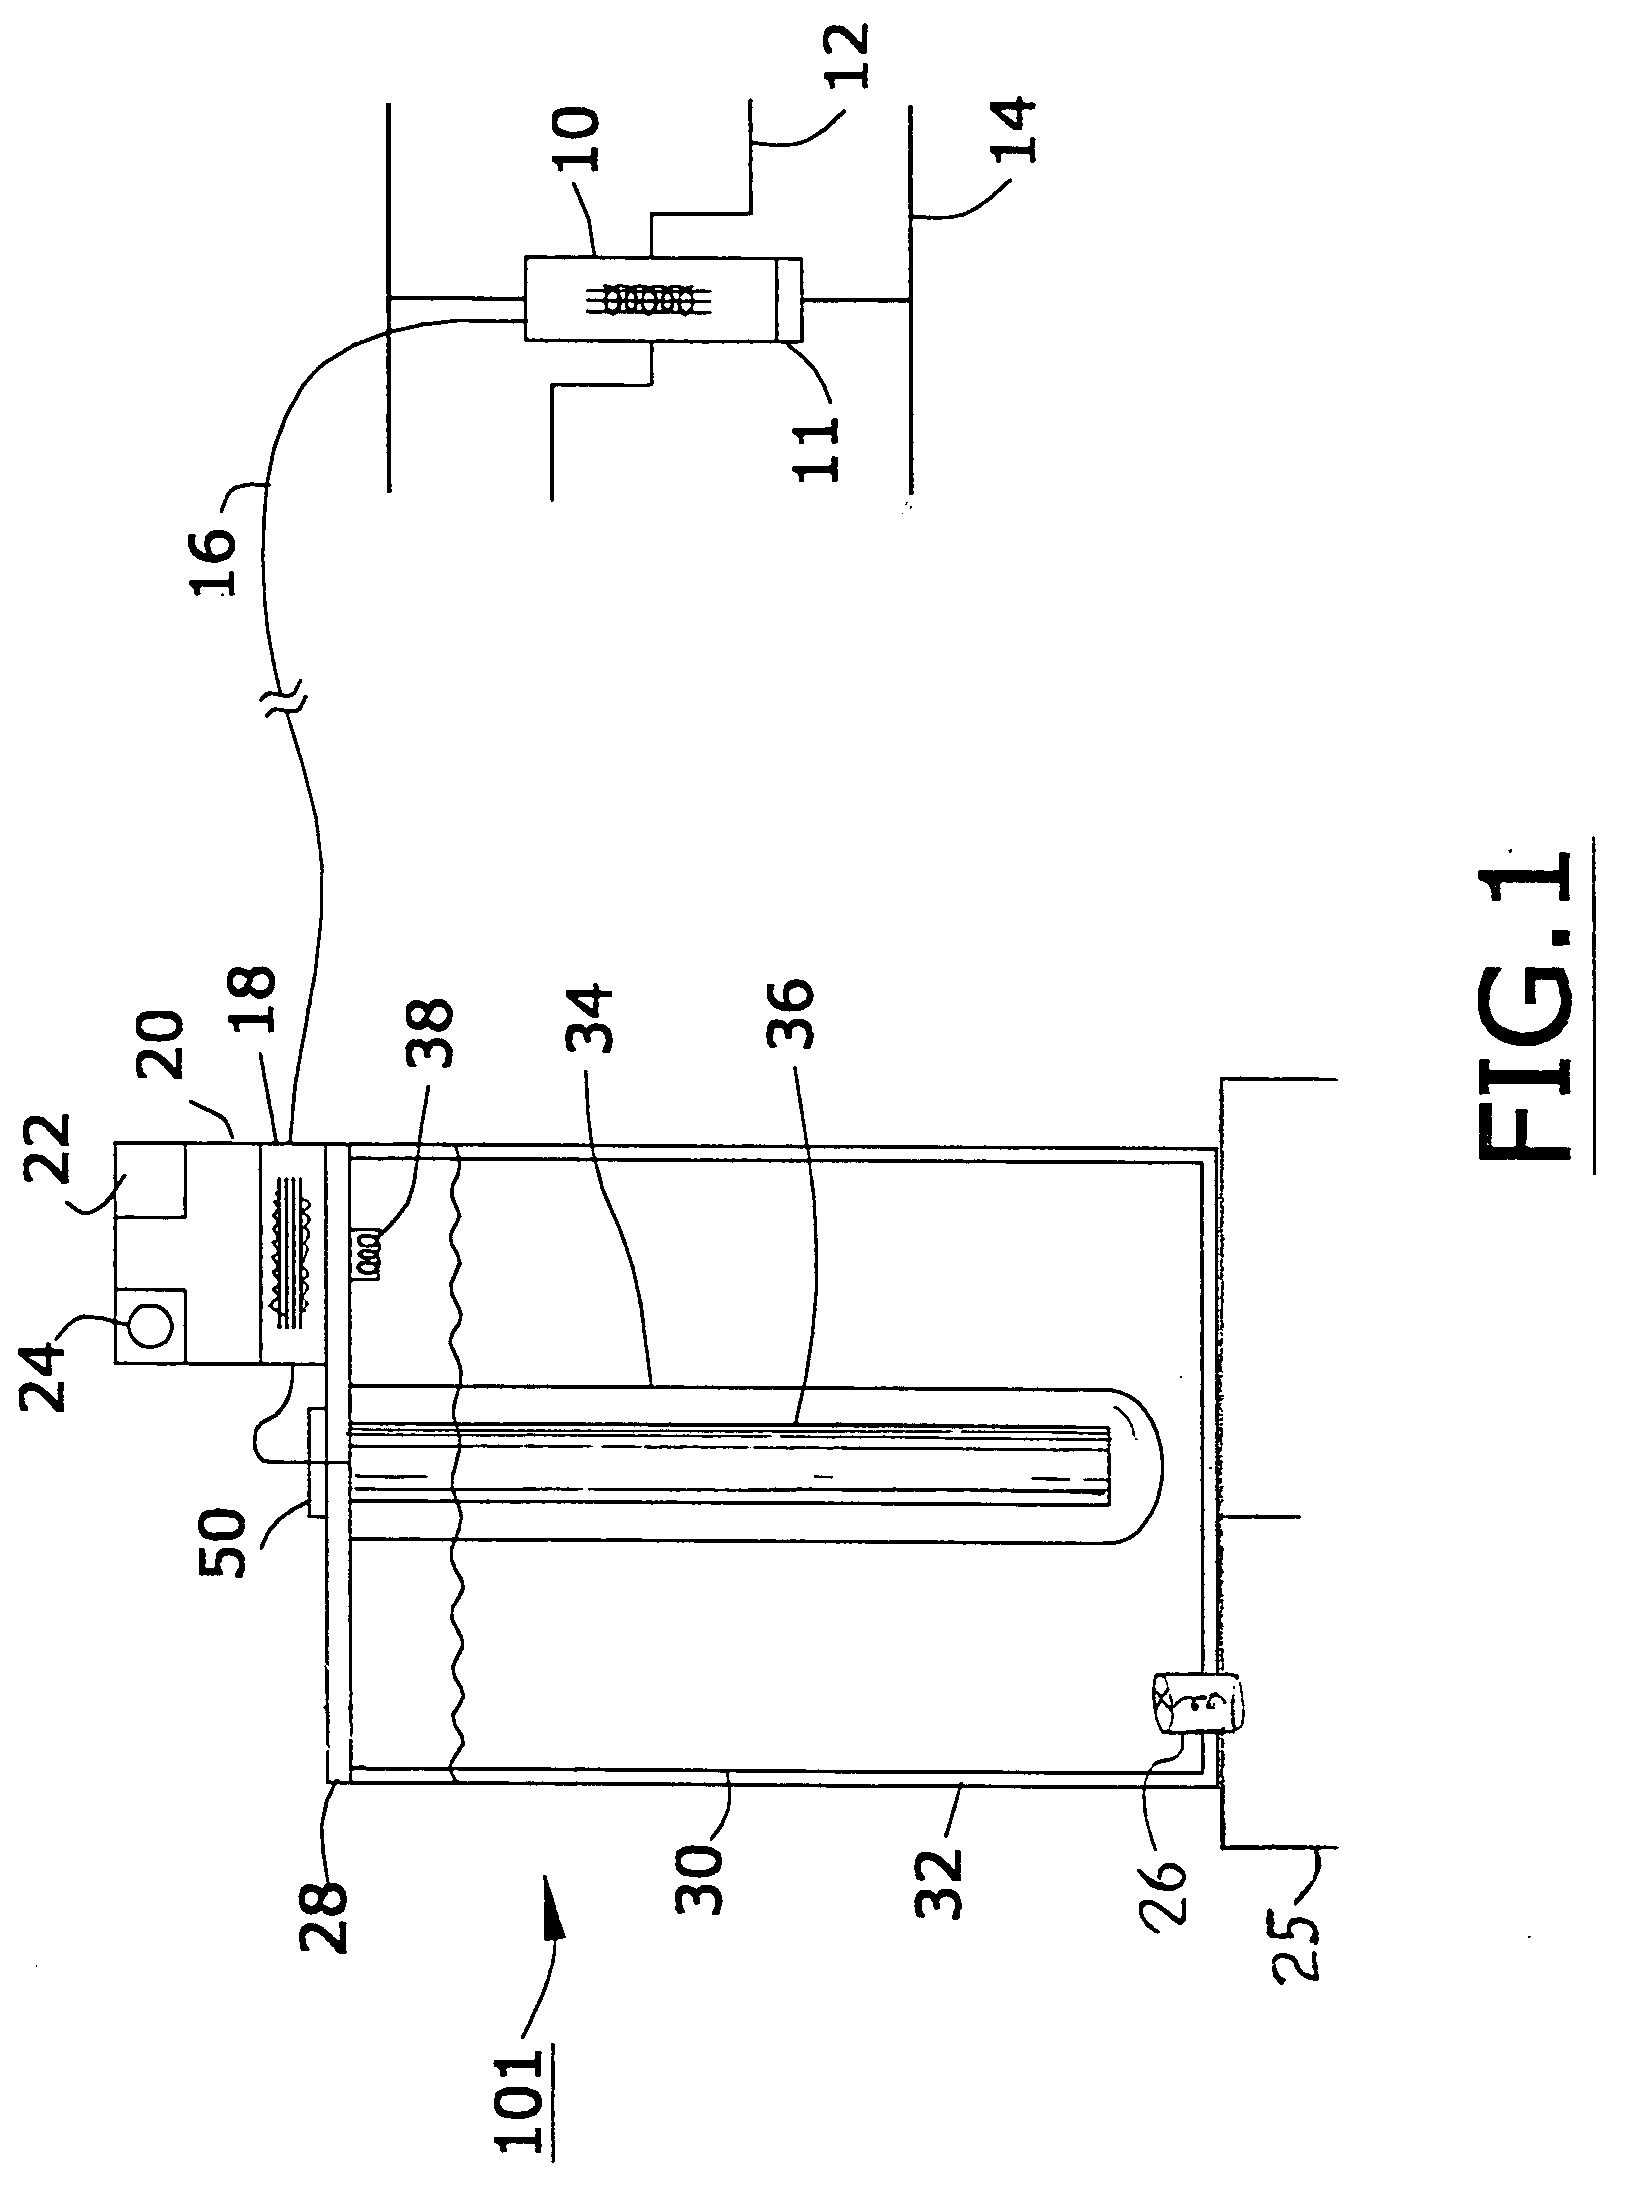 System and method for purifying water with human power